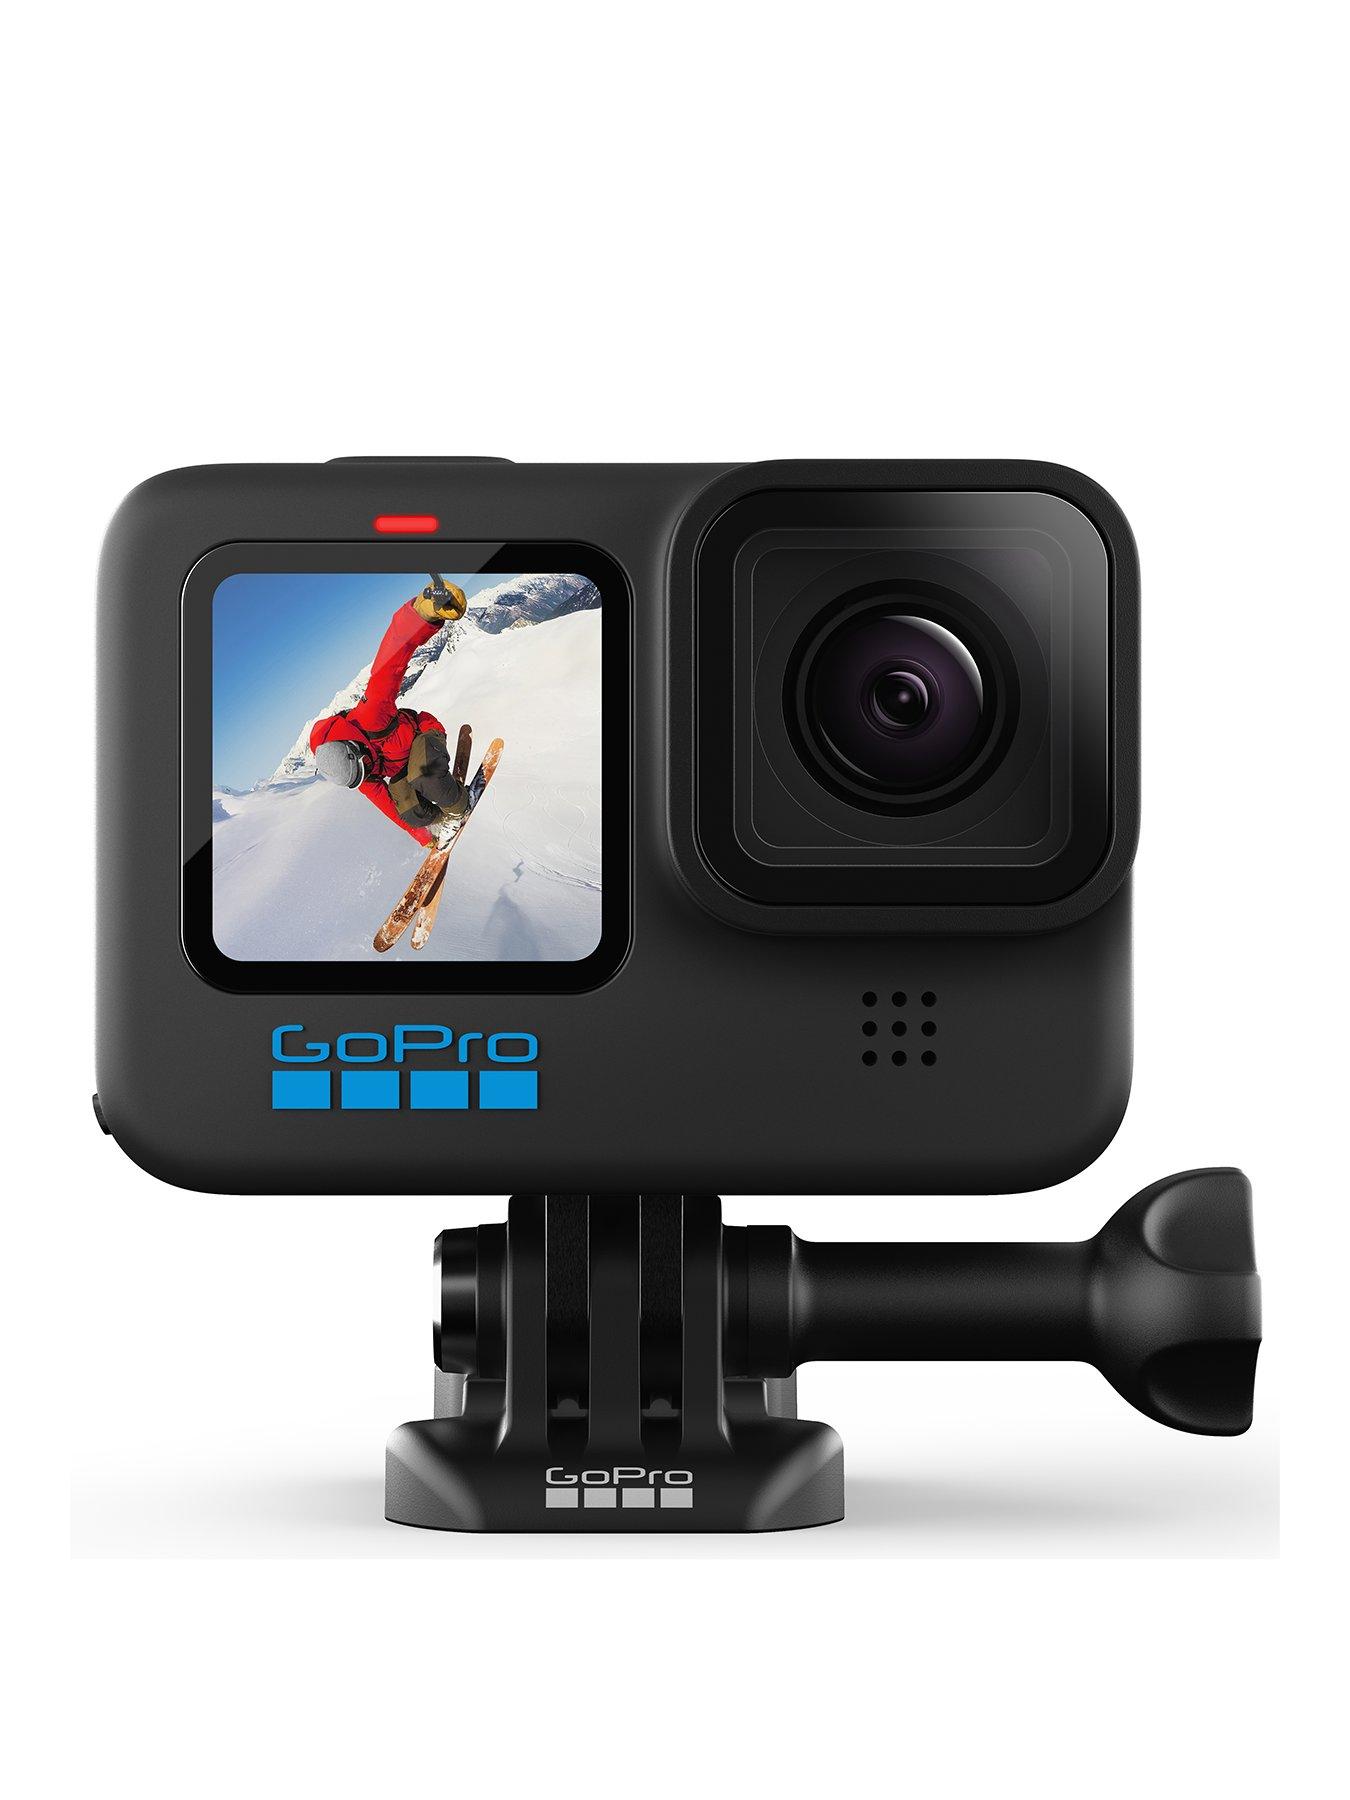 Review of the GoPro Hero10 Black - the Best GoPro Camera Yet